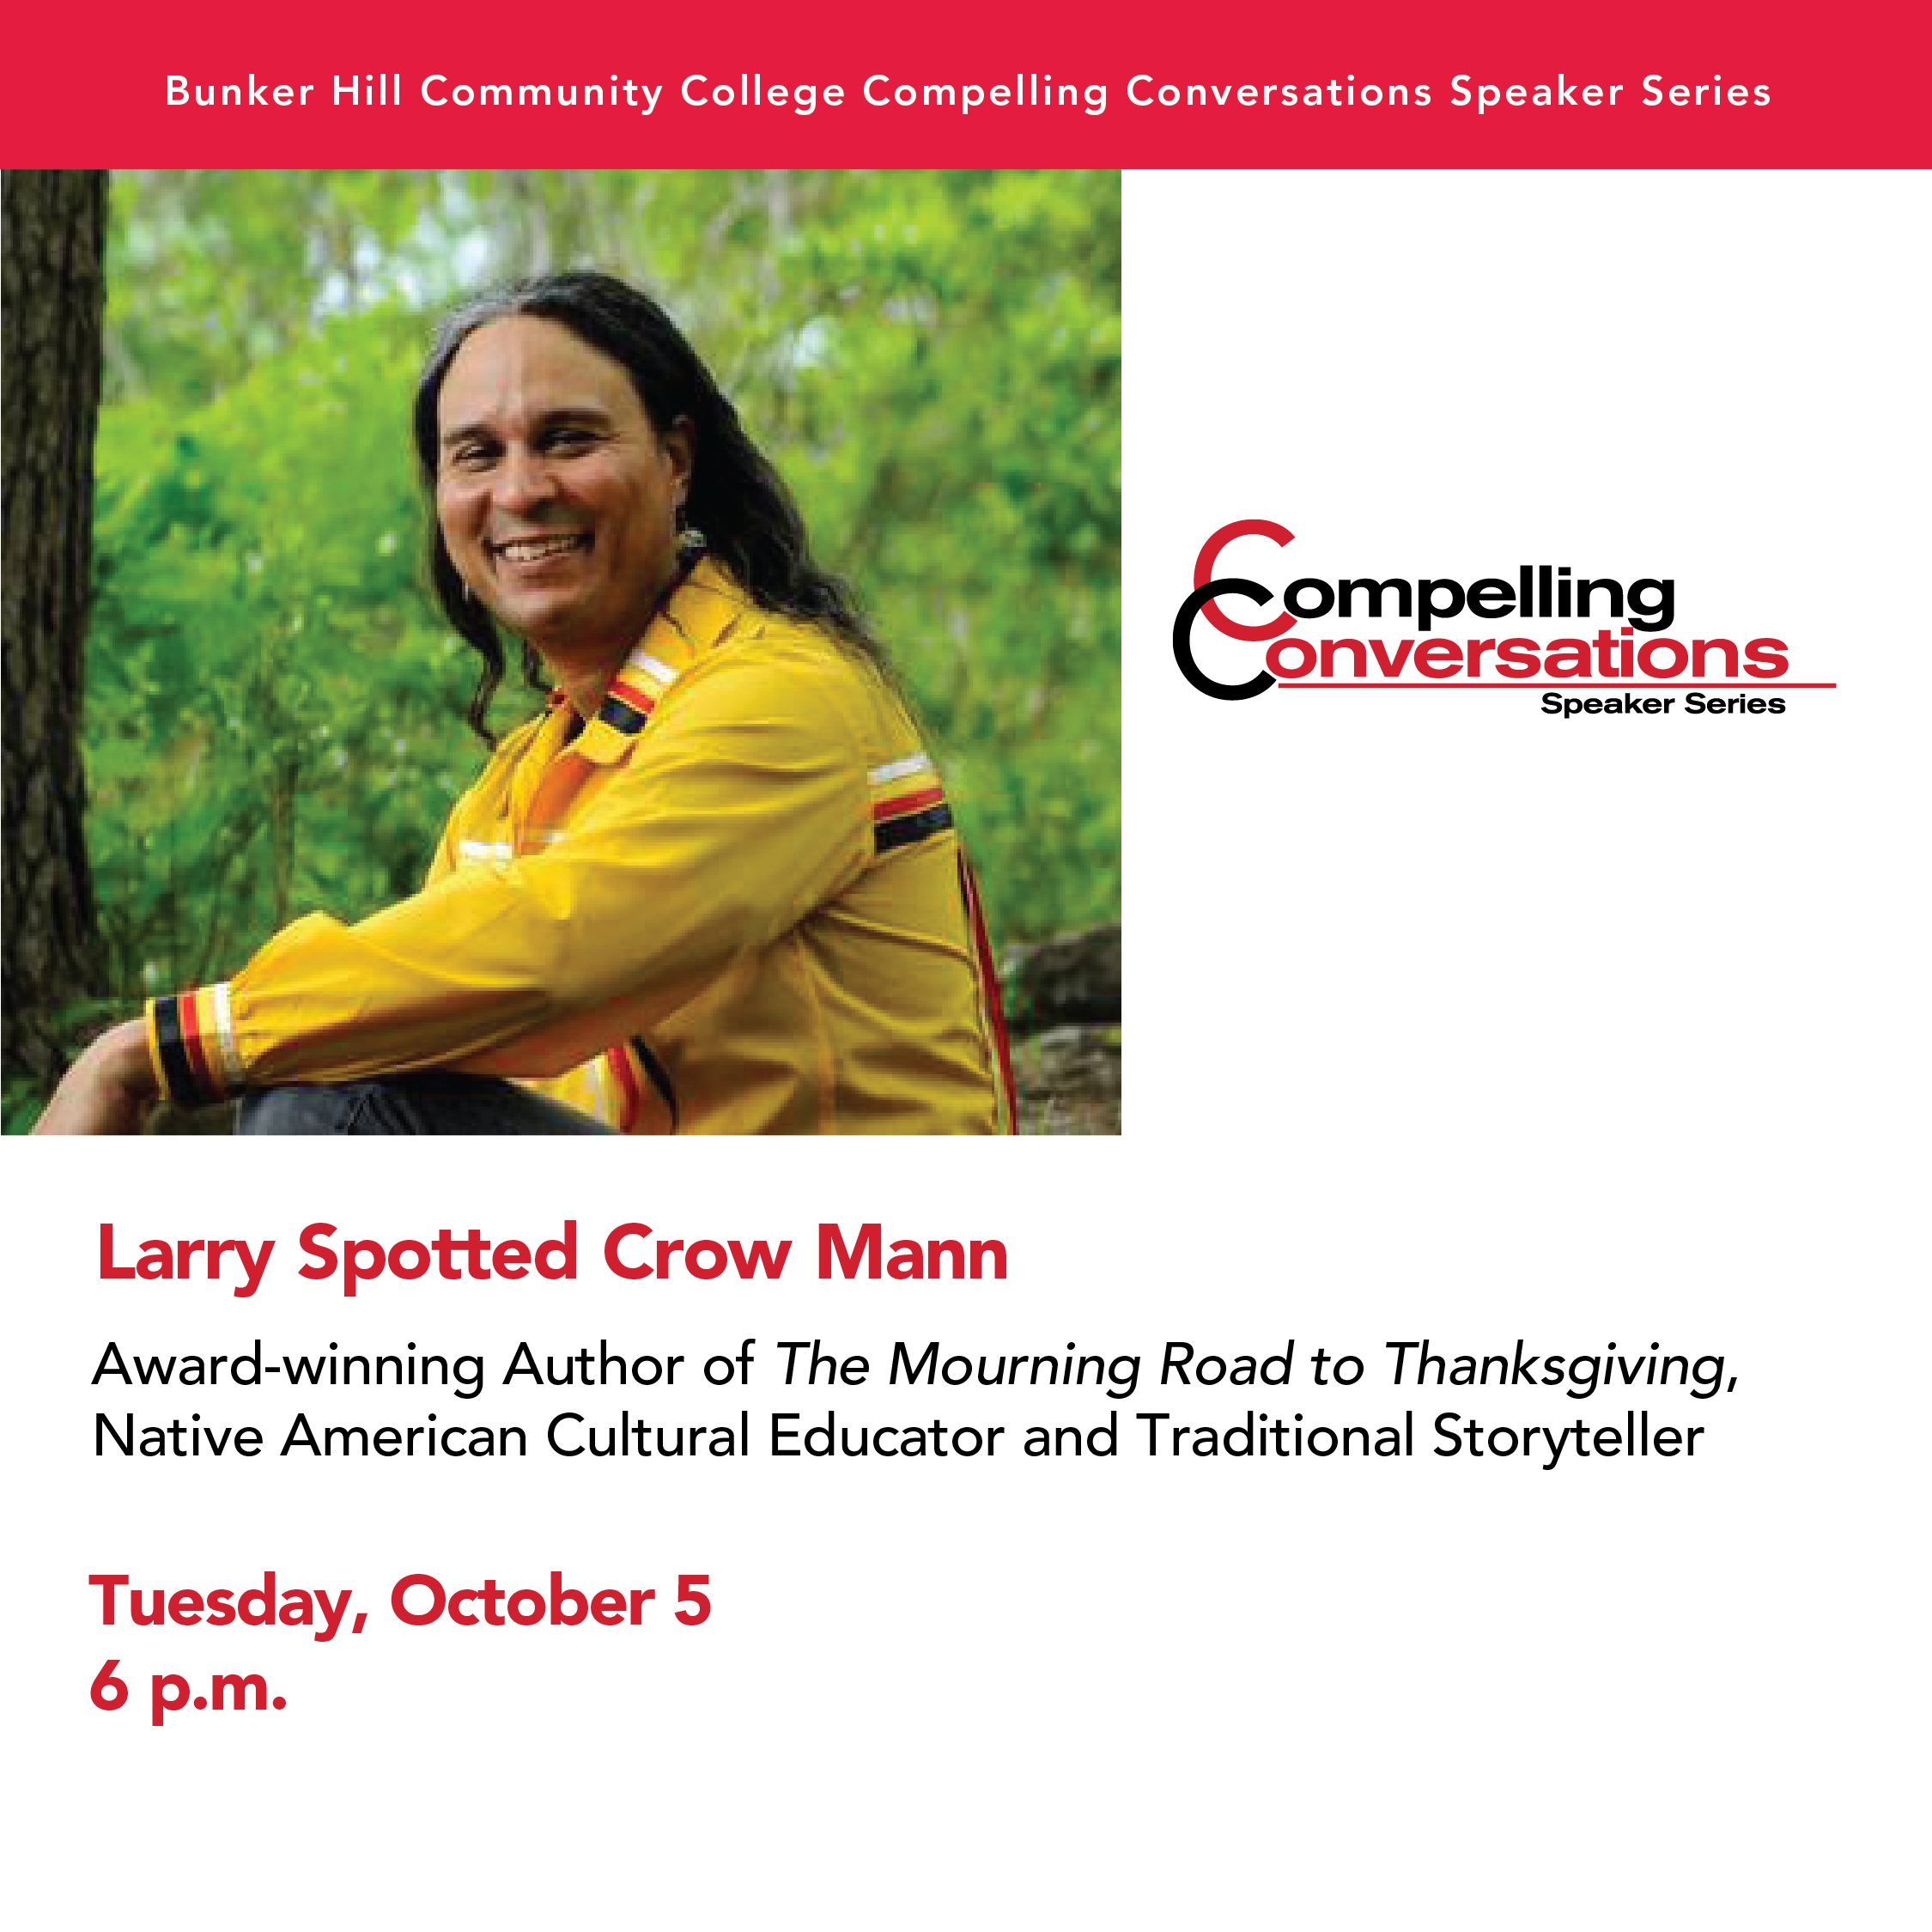 Compelling Conversations with Larry Spotted Crow Mann